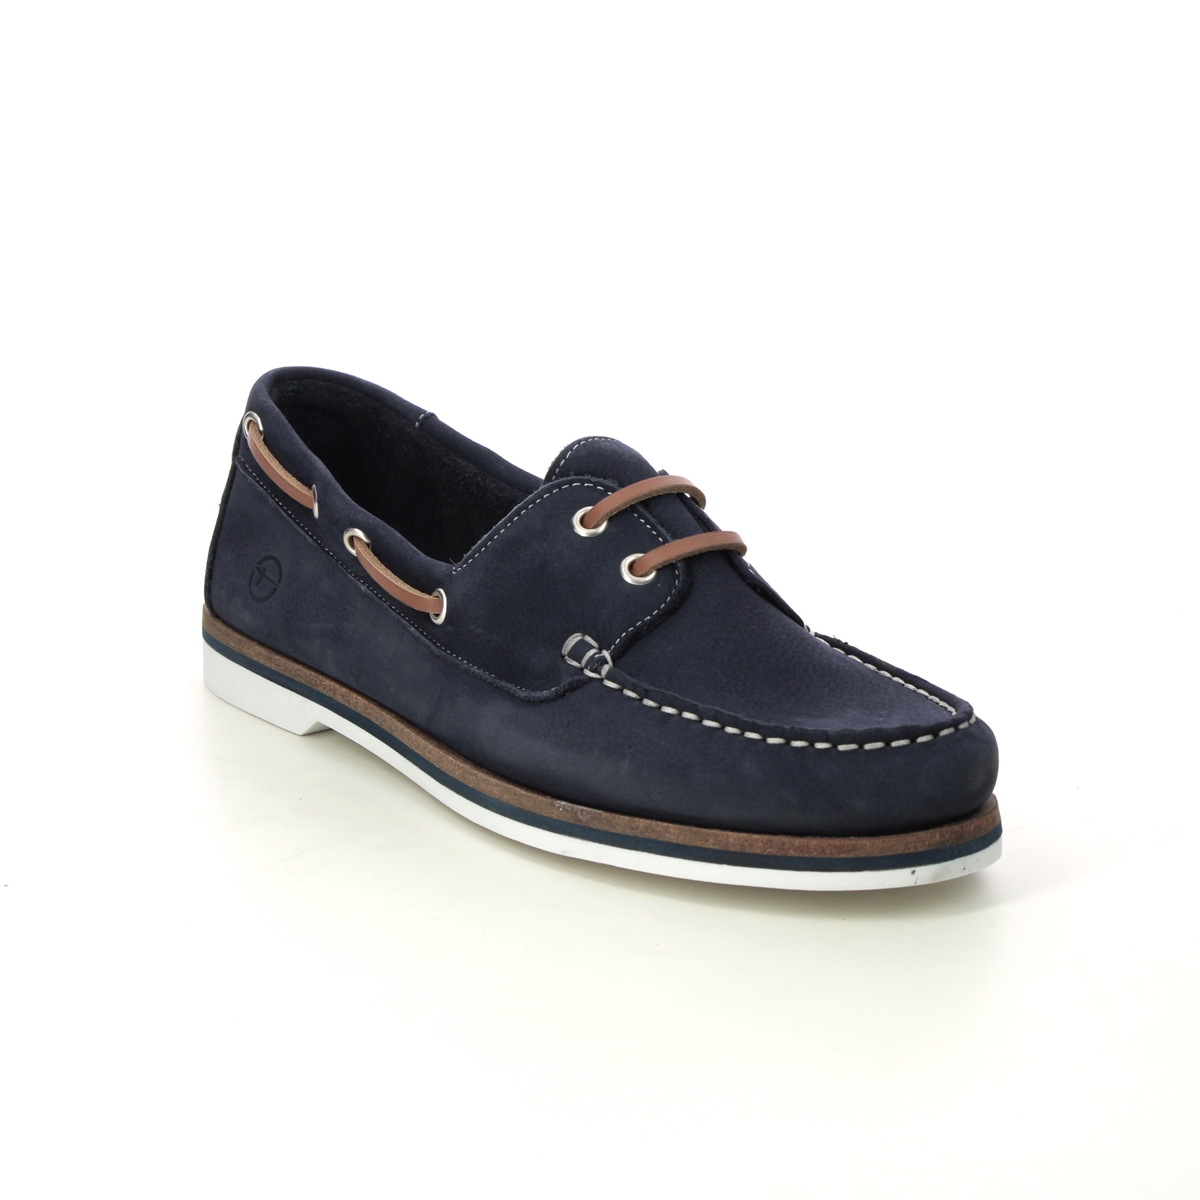 Tamaris Boat Shoe Navy Nubuck Womens loafers 23616-42-805 in a Plain Leather in Size 36